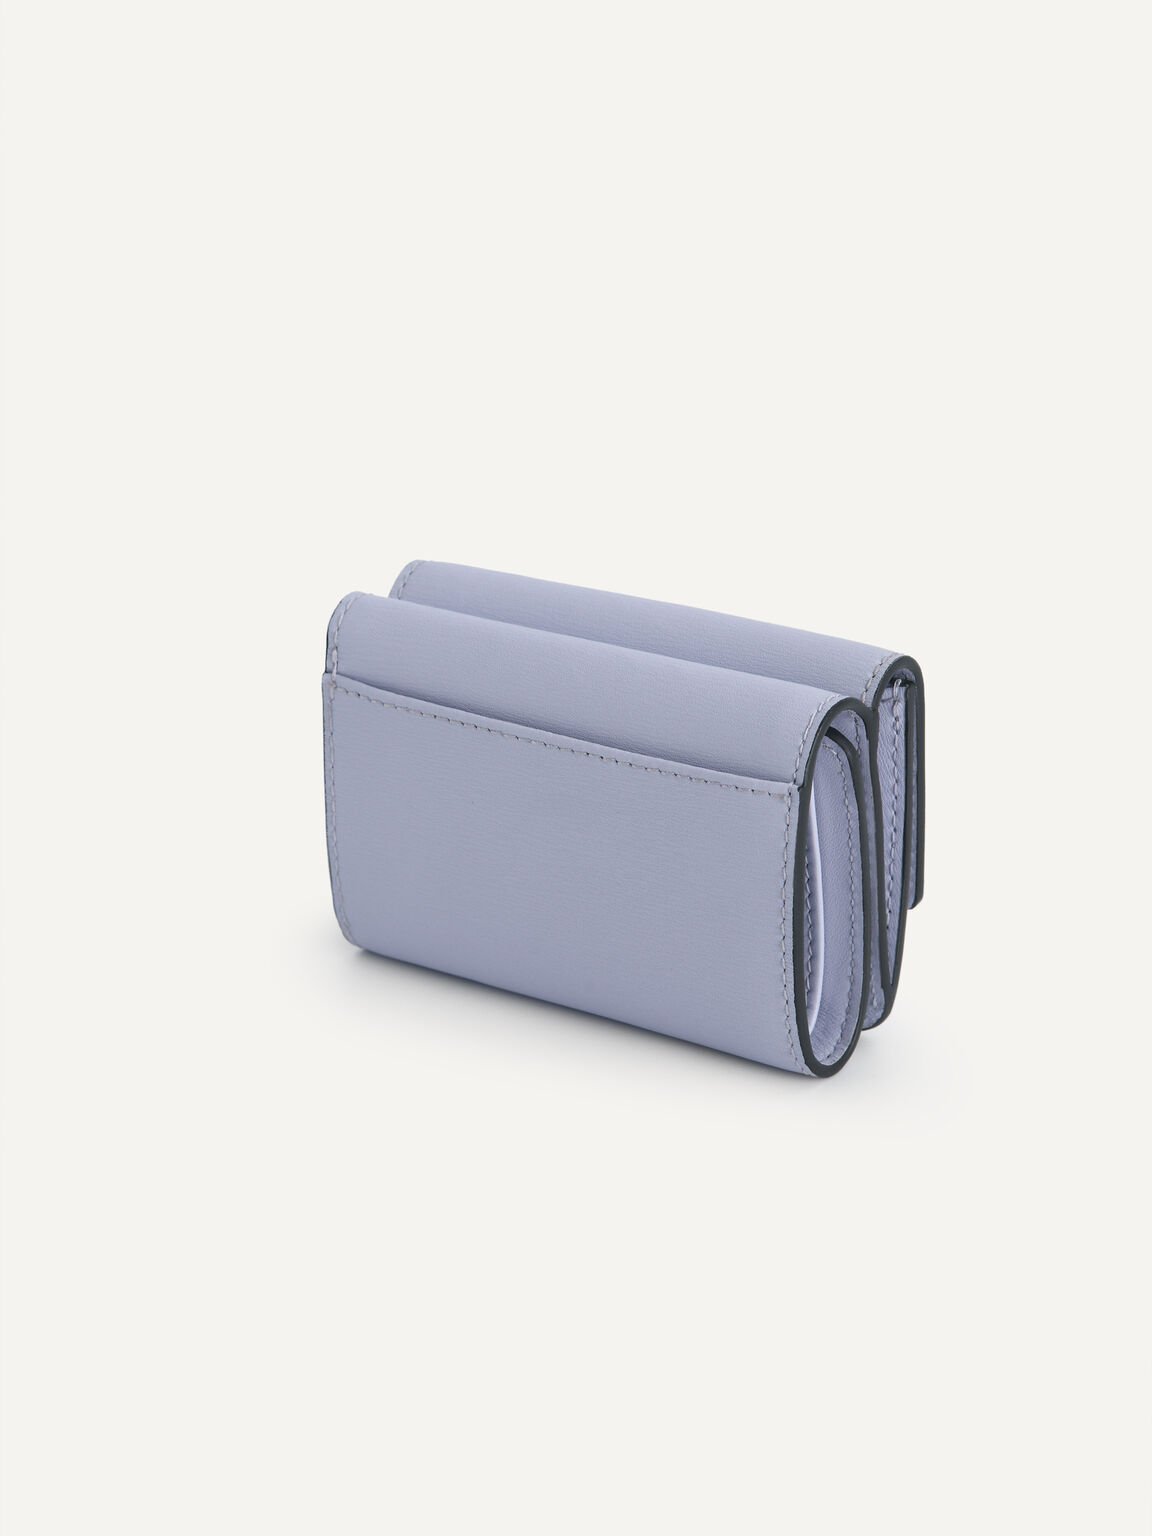 Textured Leather Trifold Wallet, Lilac, hi-res